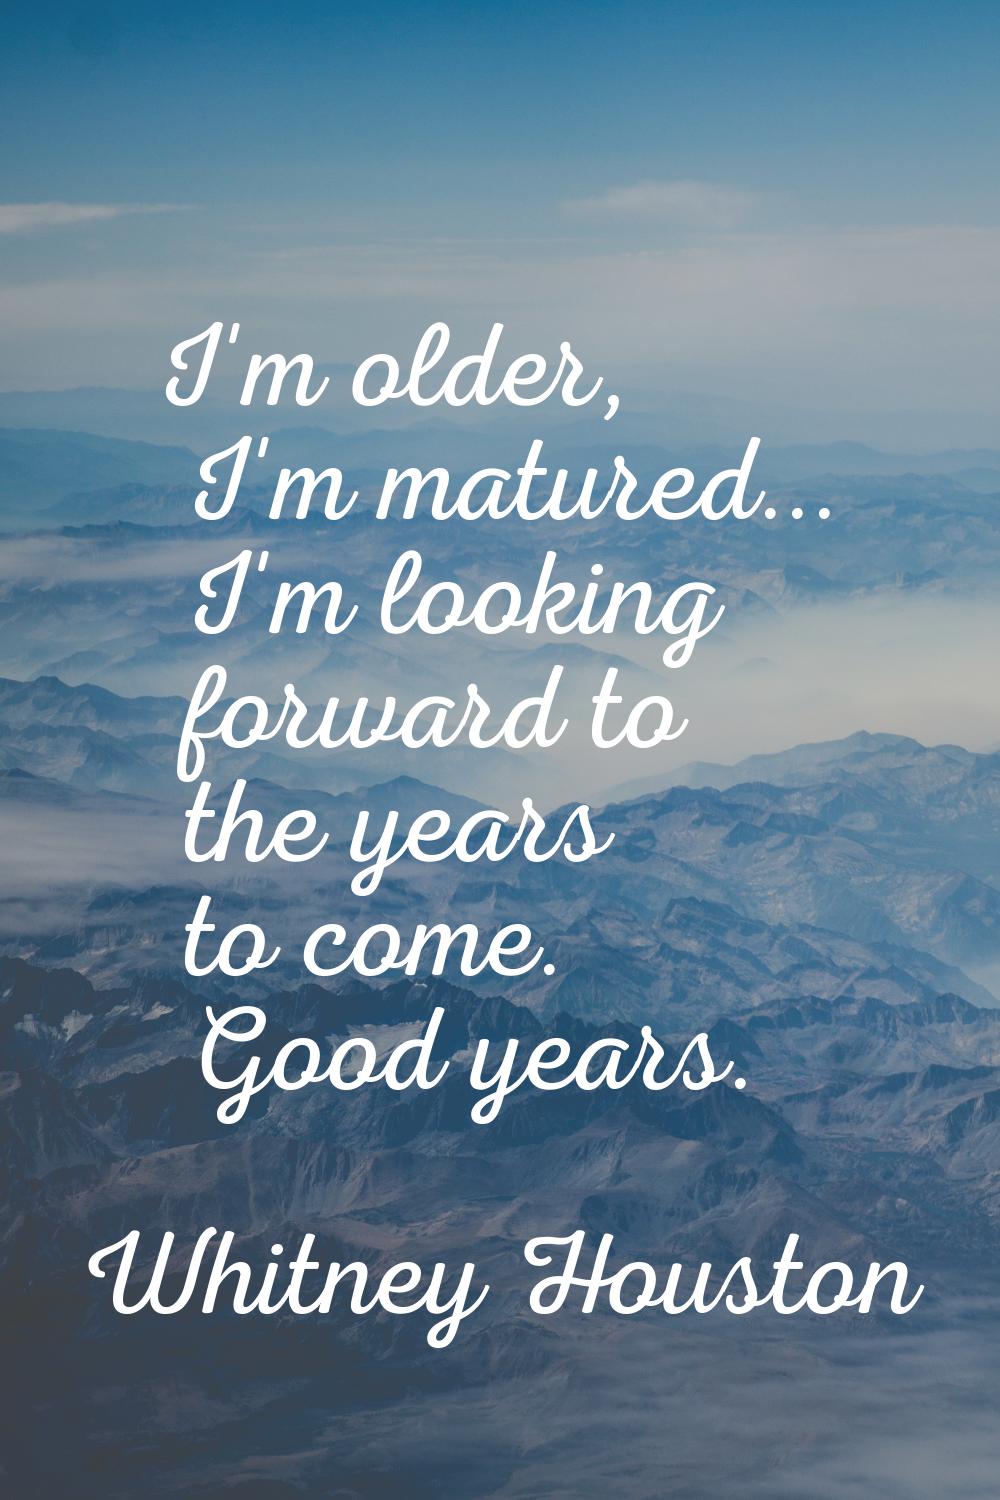 I'm older, I'm matured... I'm looking forward to the years to come. Good years.